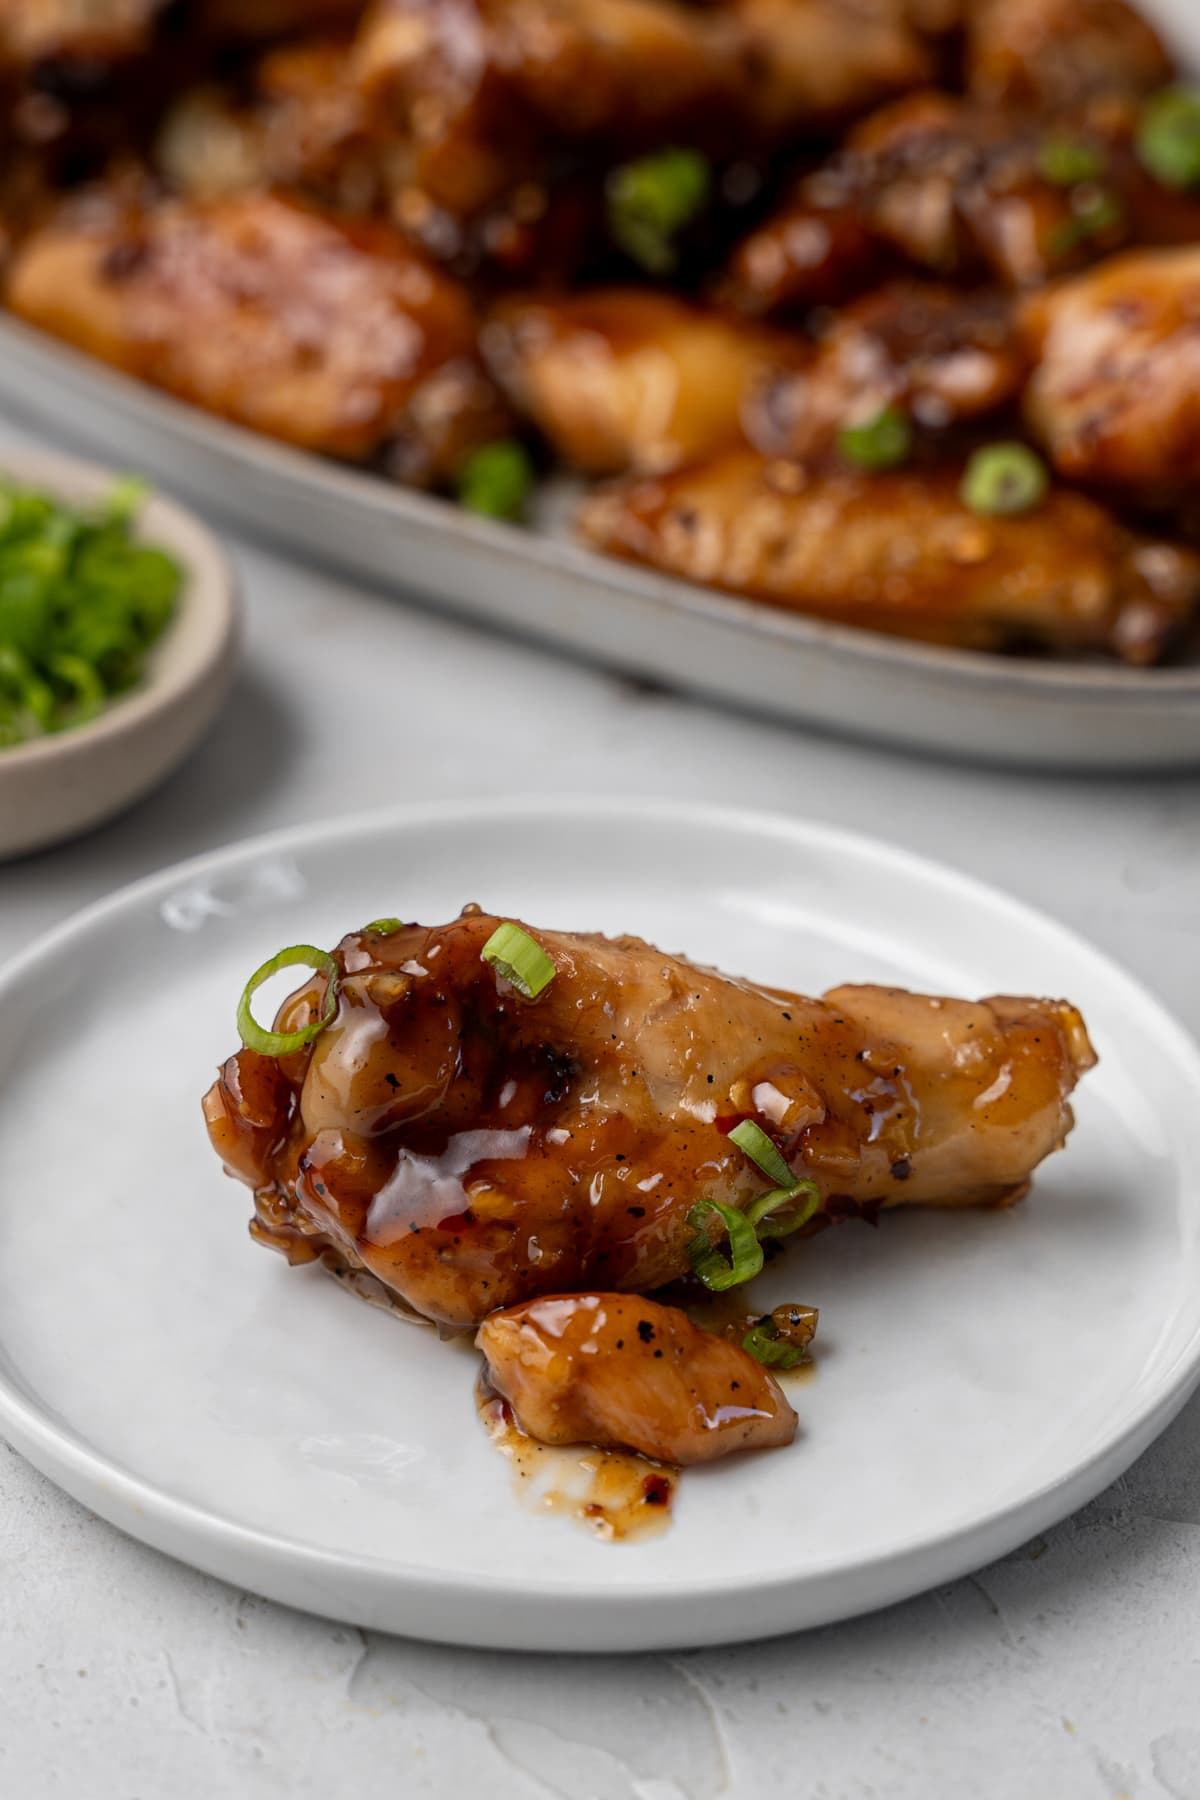 Honey garlic wing on a small plate.